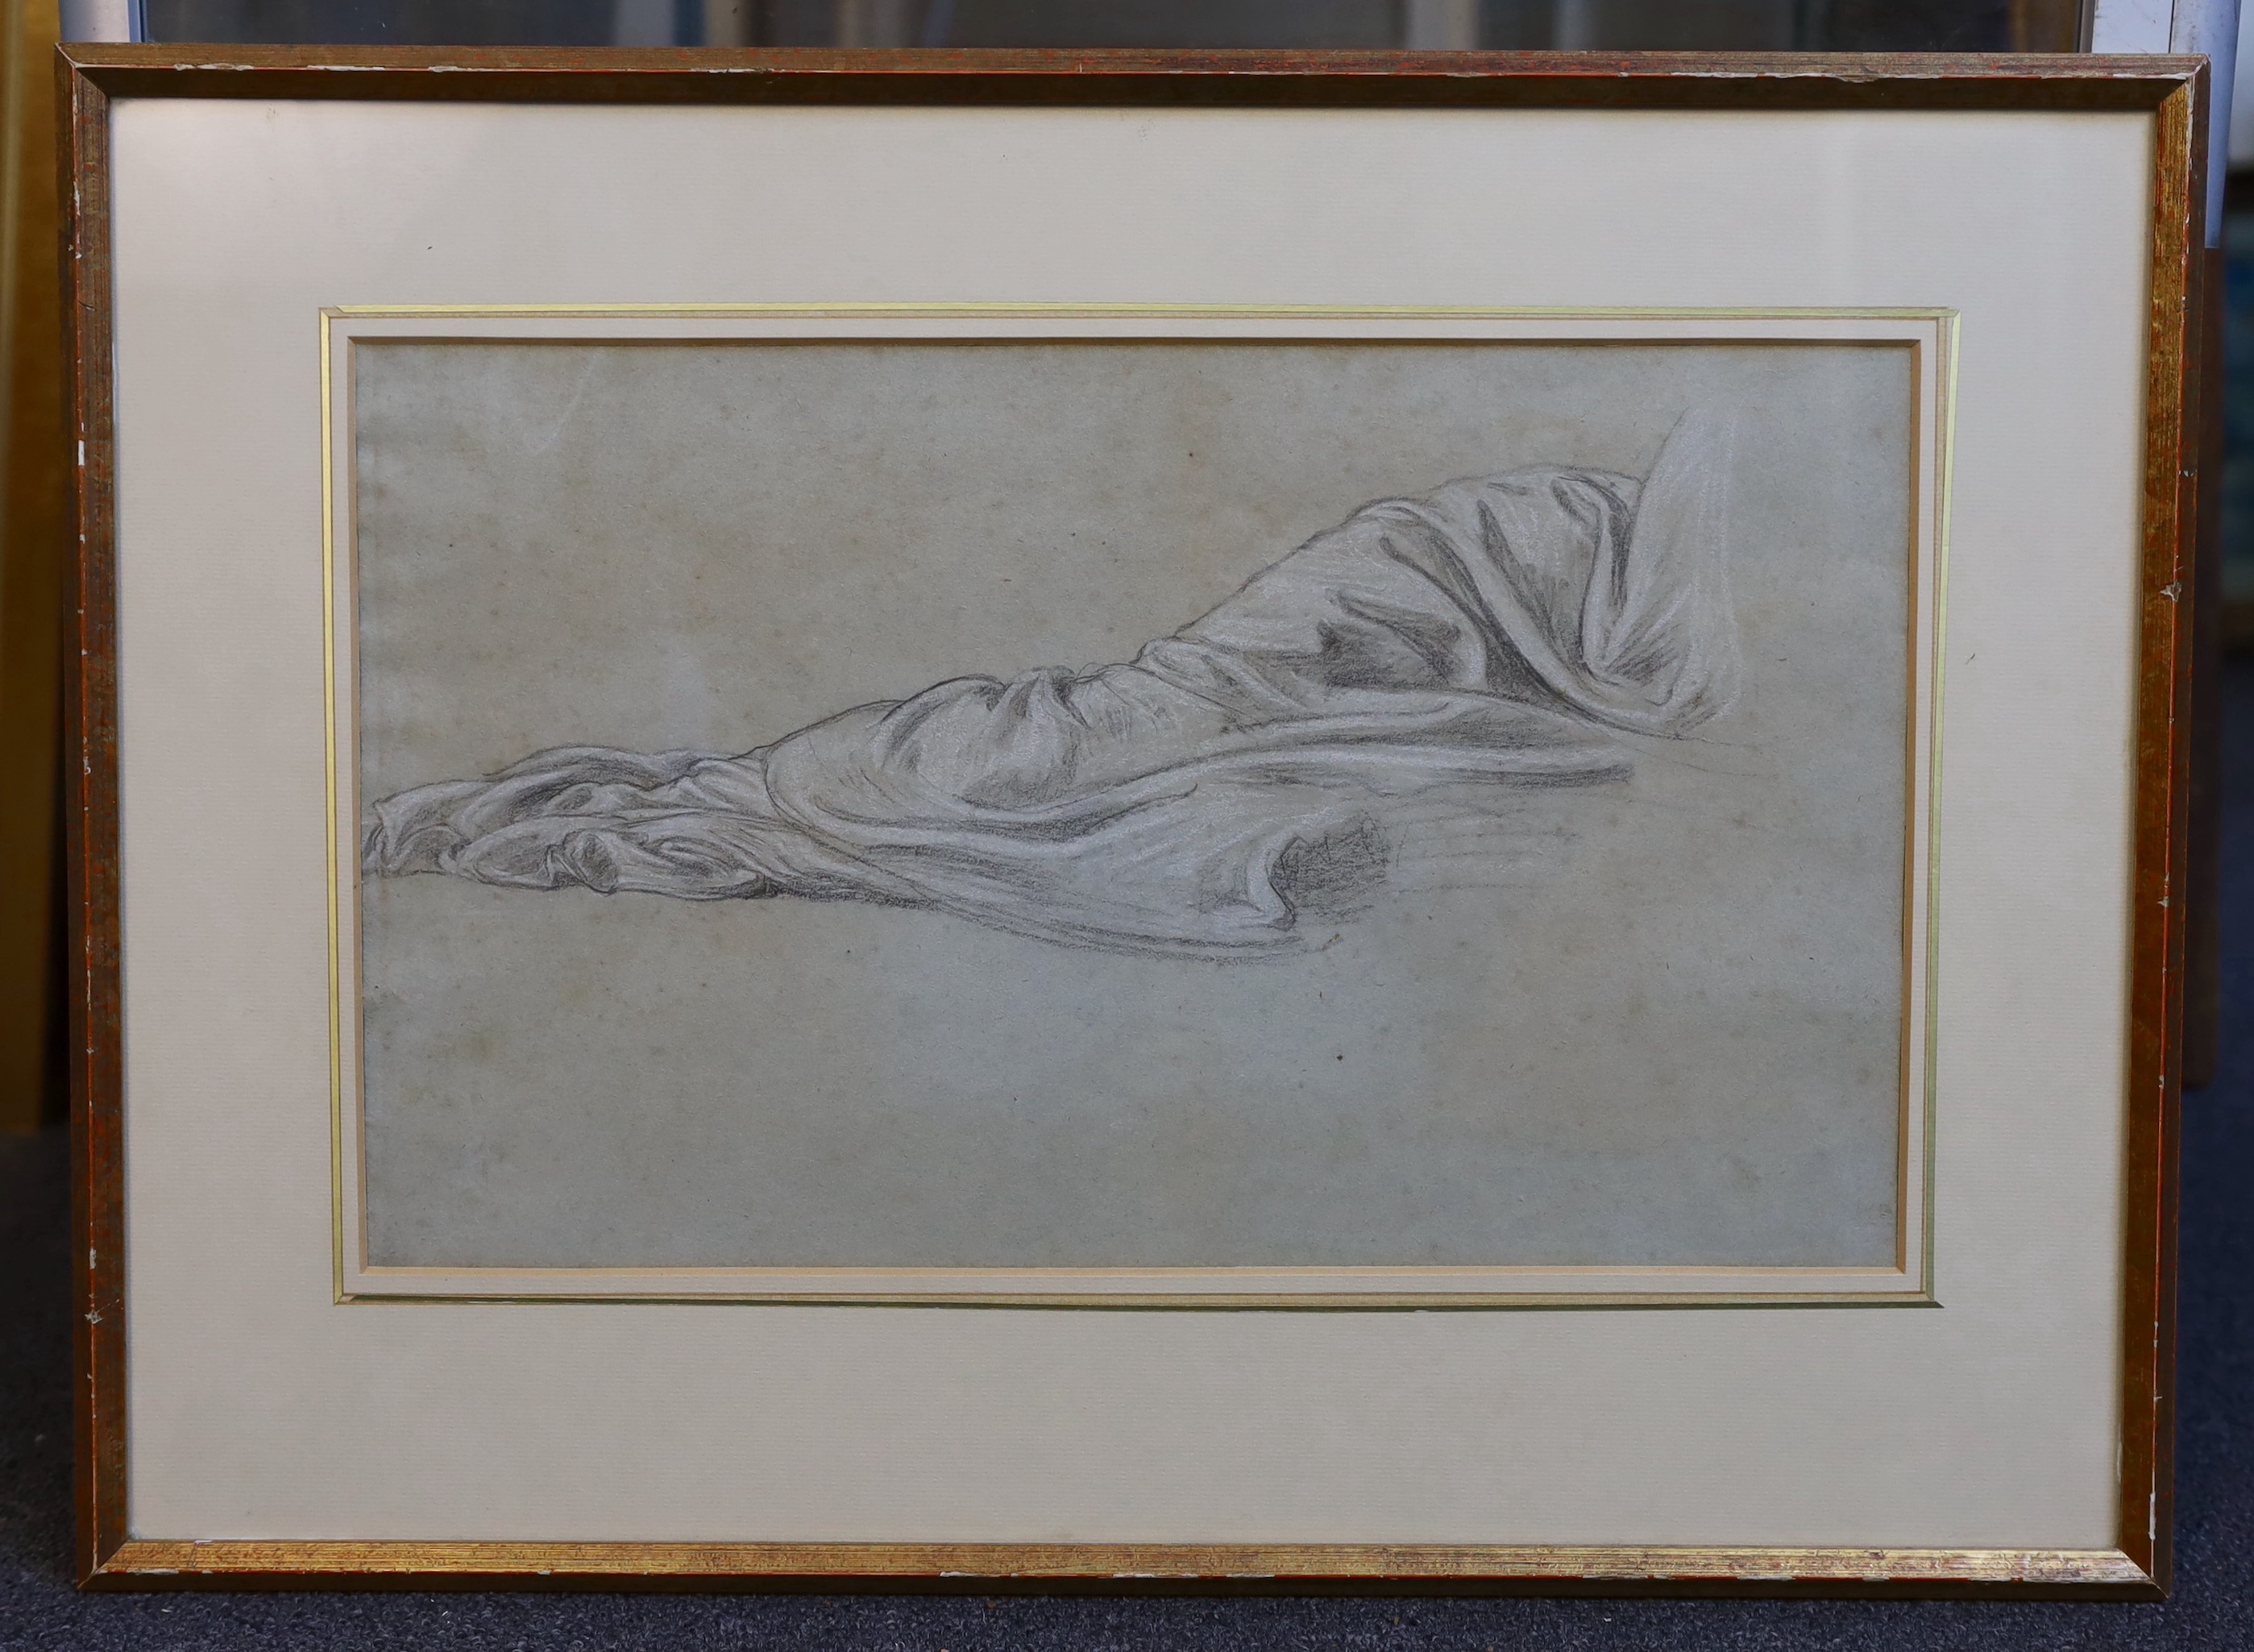 Lord Frederic Leighton, P.R.A. (British, 1830-1896), Study for the Wise and Foolish Angels, Lyndhurst Church, drapery for figure lower right, black and white chalk on light grey paper, 25 x 42cm